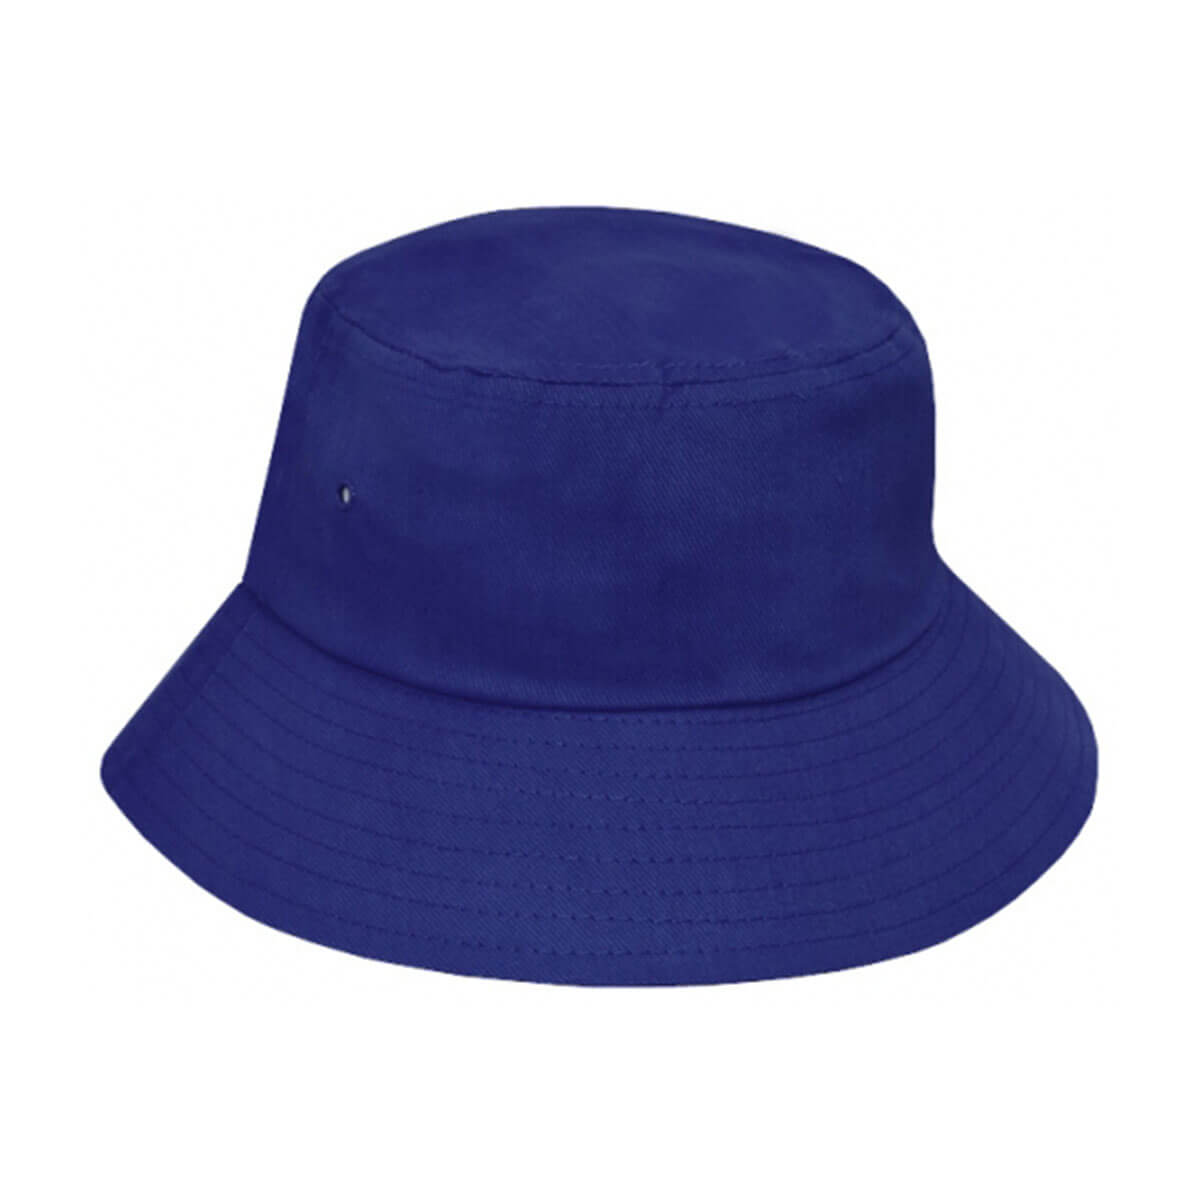 Bucket Hat | Branded Hats | Promotional Cotton Hats